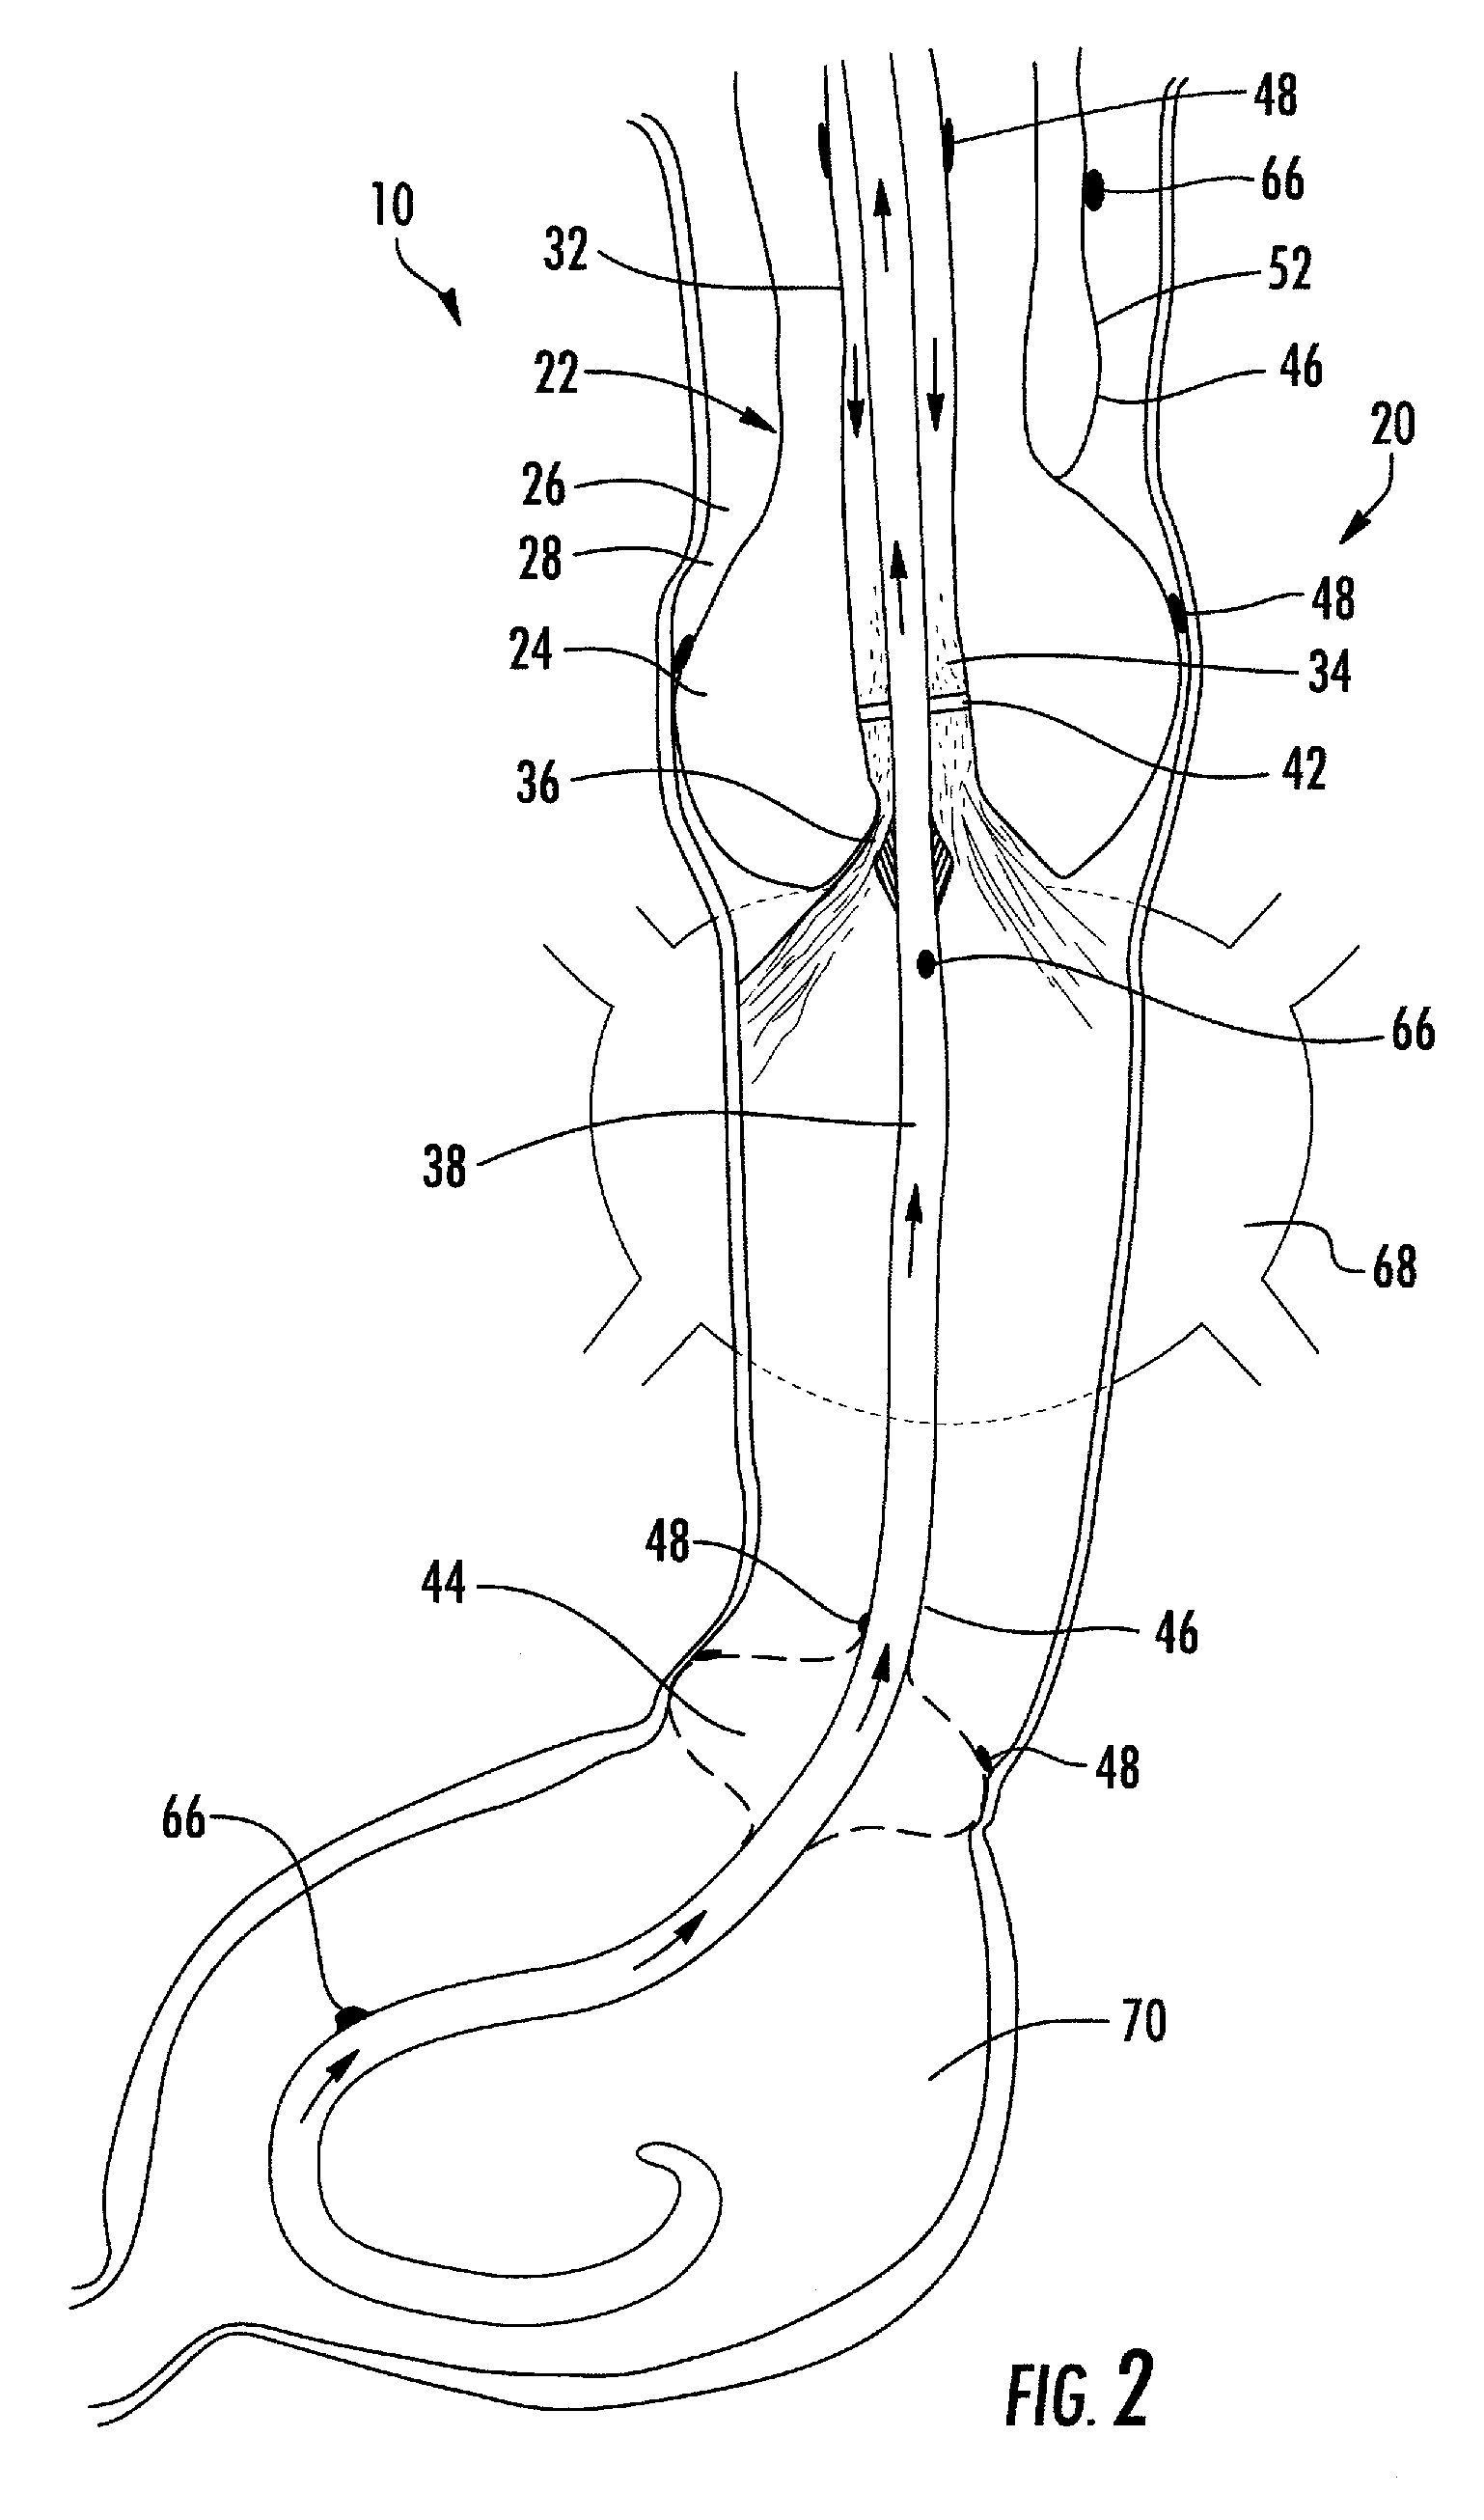 Esophageal cooling system for ablation procedures associated with cardiac arrhythmias